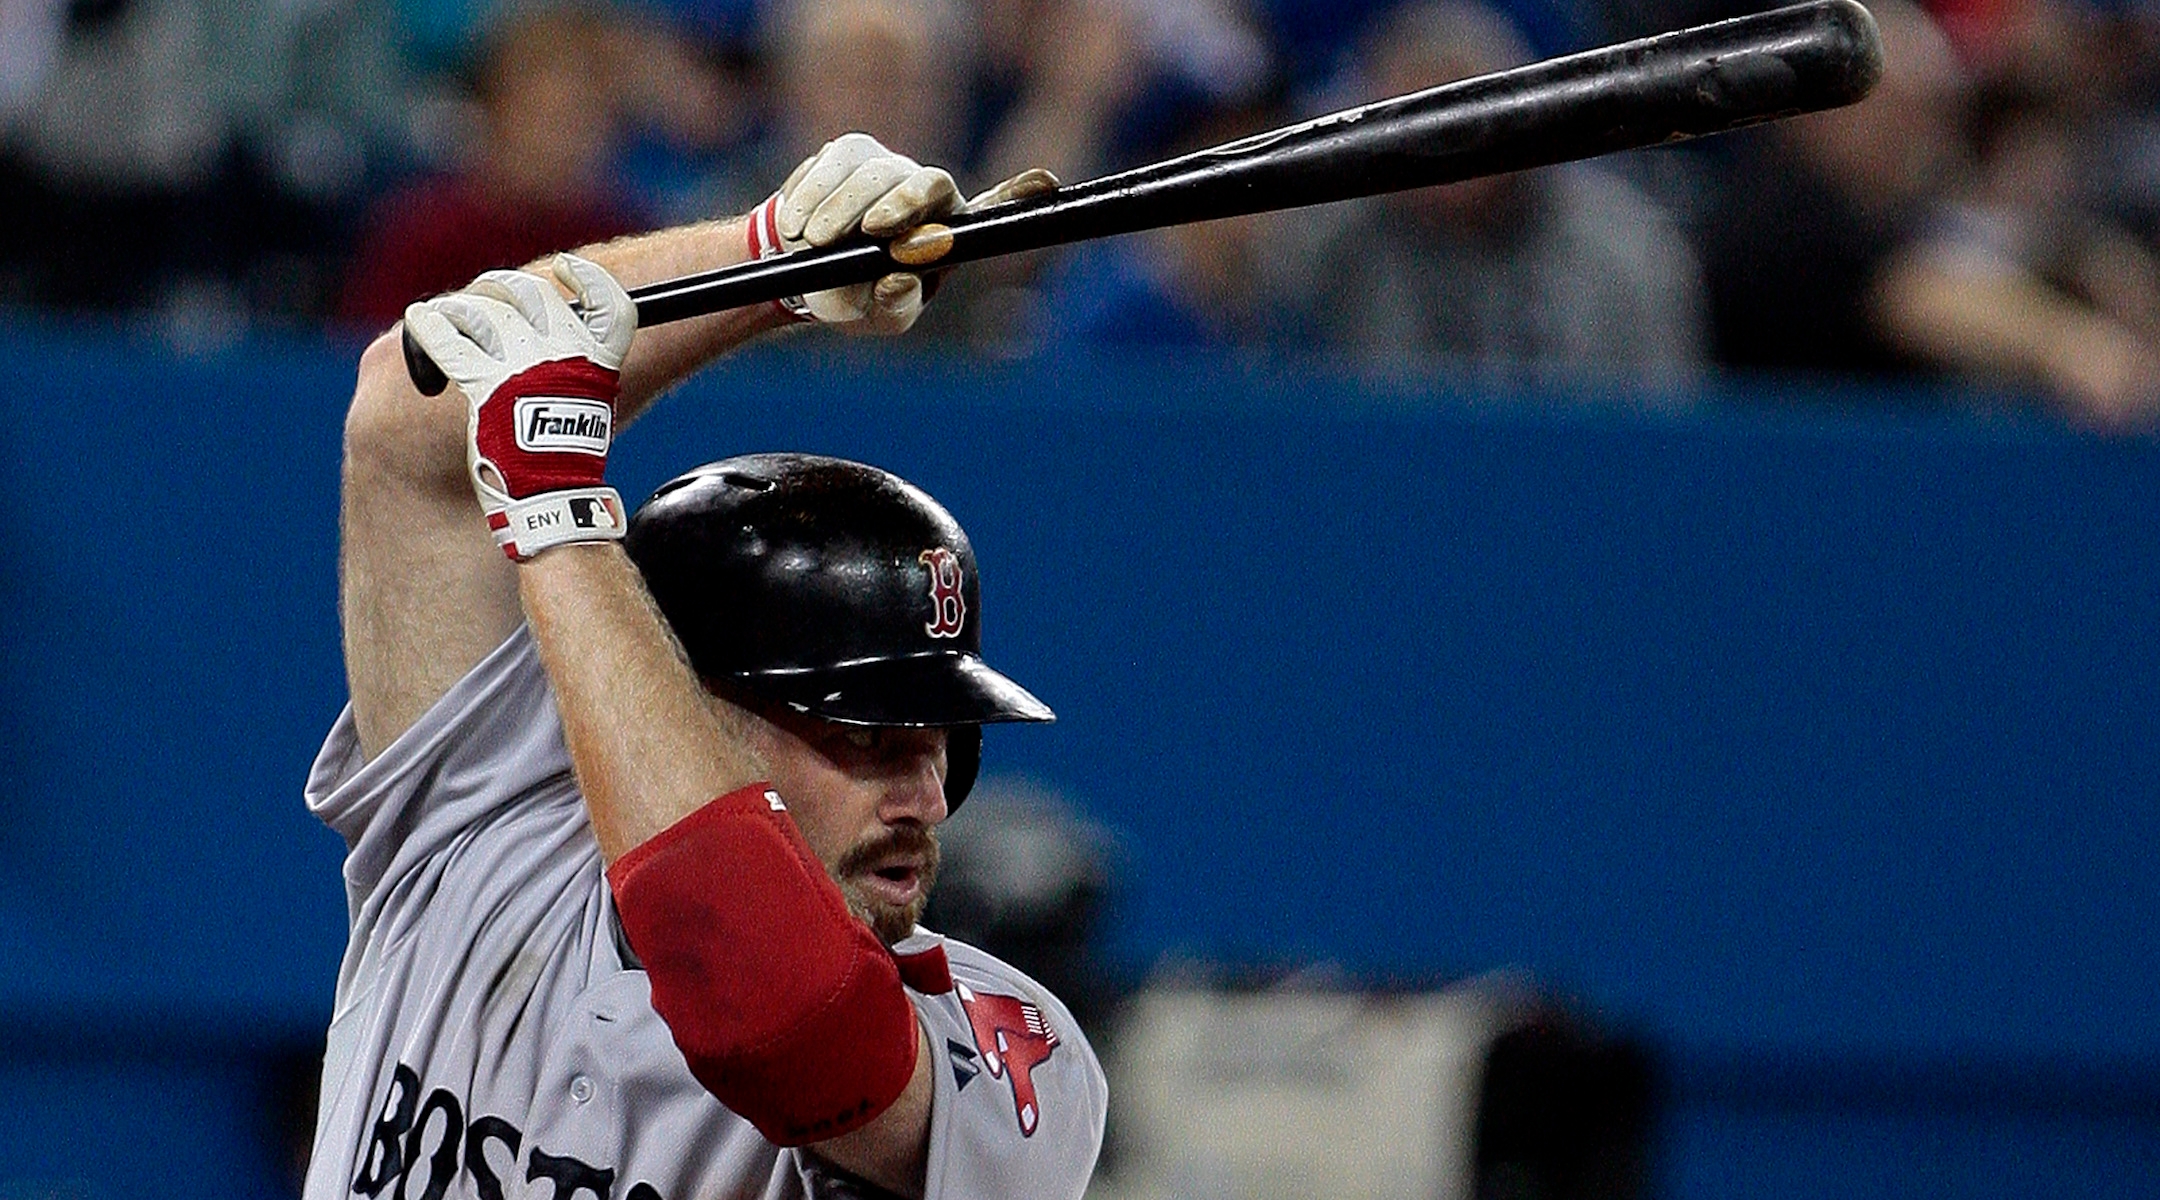 It's thumb's down for Red Sox' Kevin Youkilis